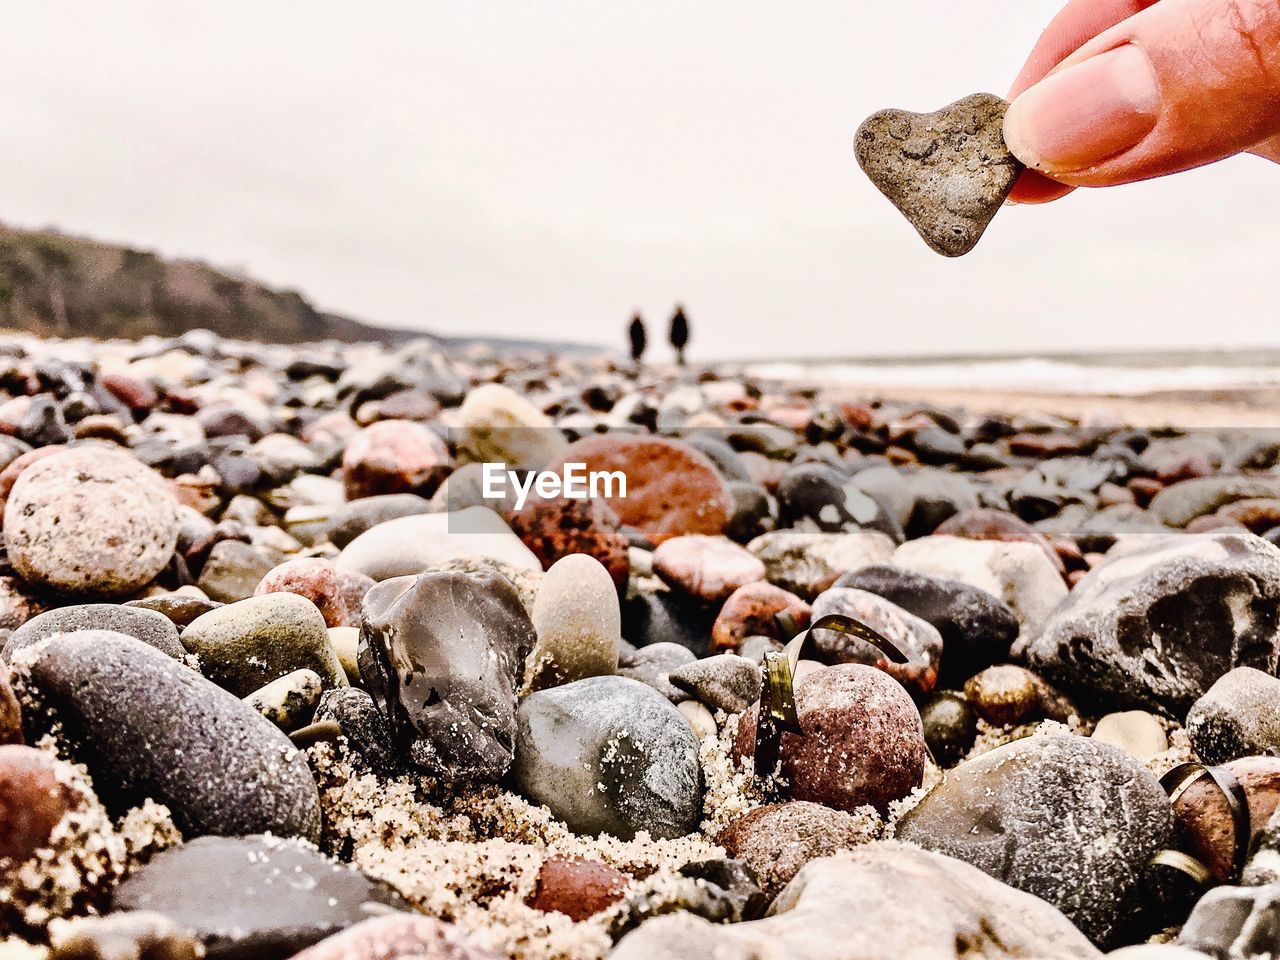 Cropped hand holding heart shaped stone at beach